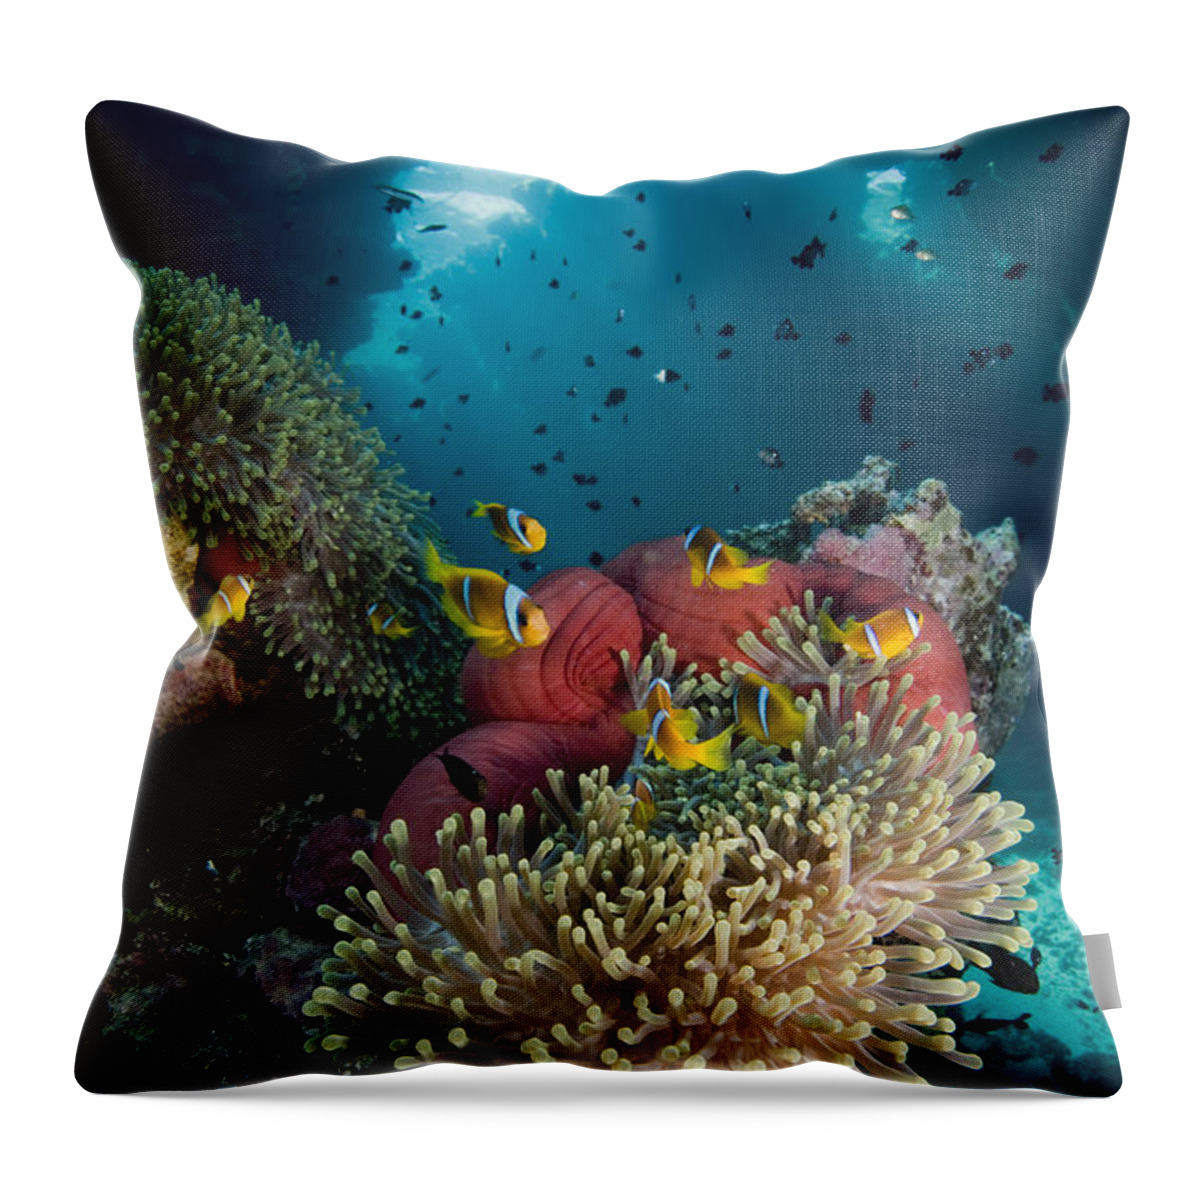 Nis Throw Pillow featuring the photograph Two-banded Anemonefish And Bulb by Dray van Beeck